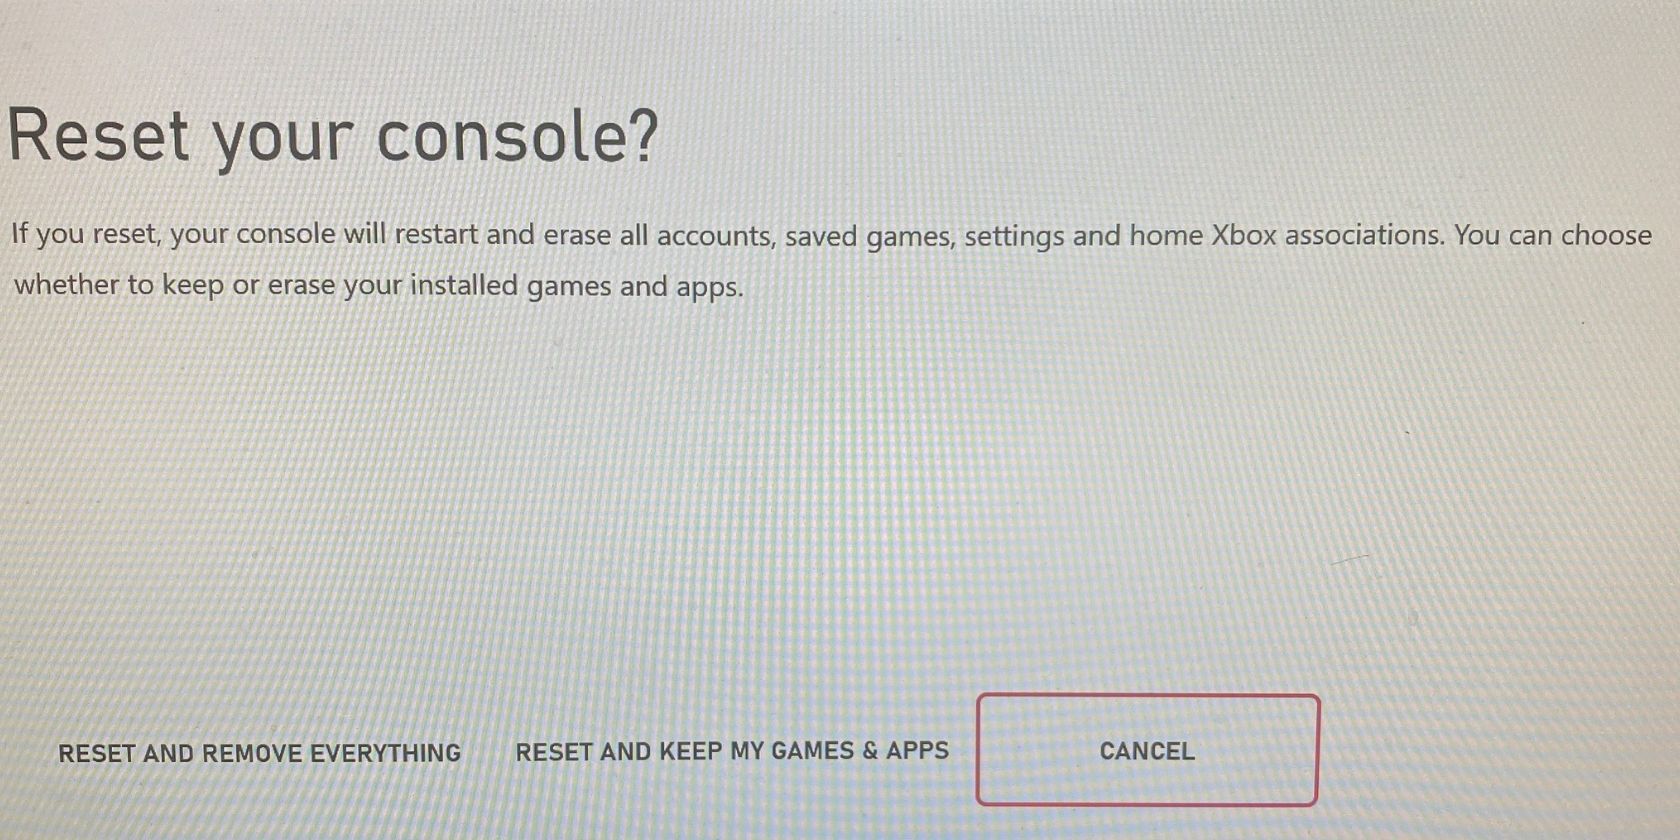 The Reset Console dialog box on the Xbox One.